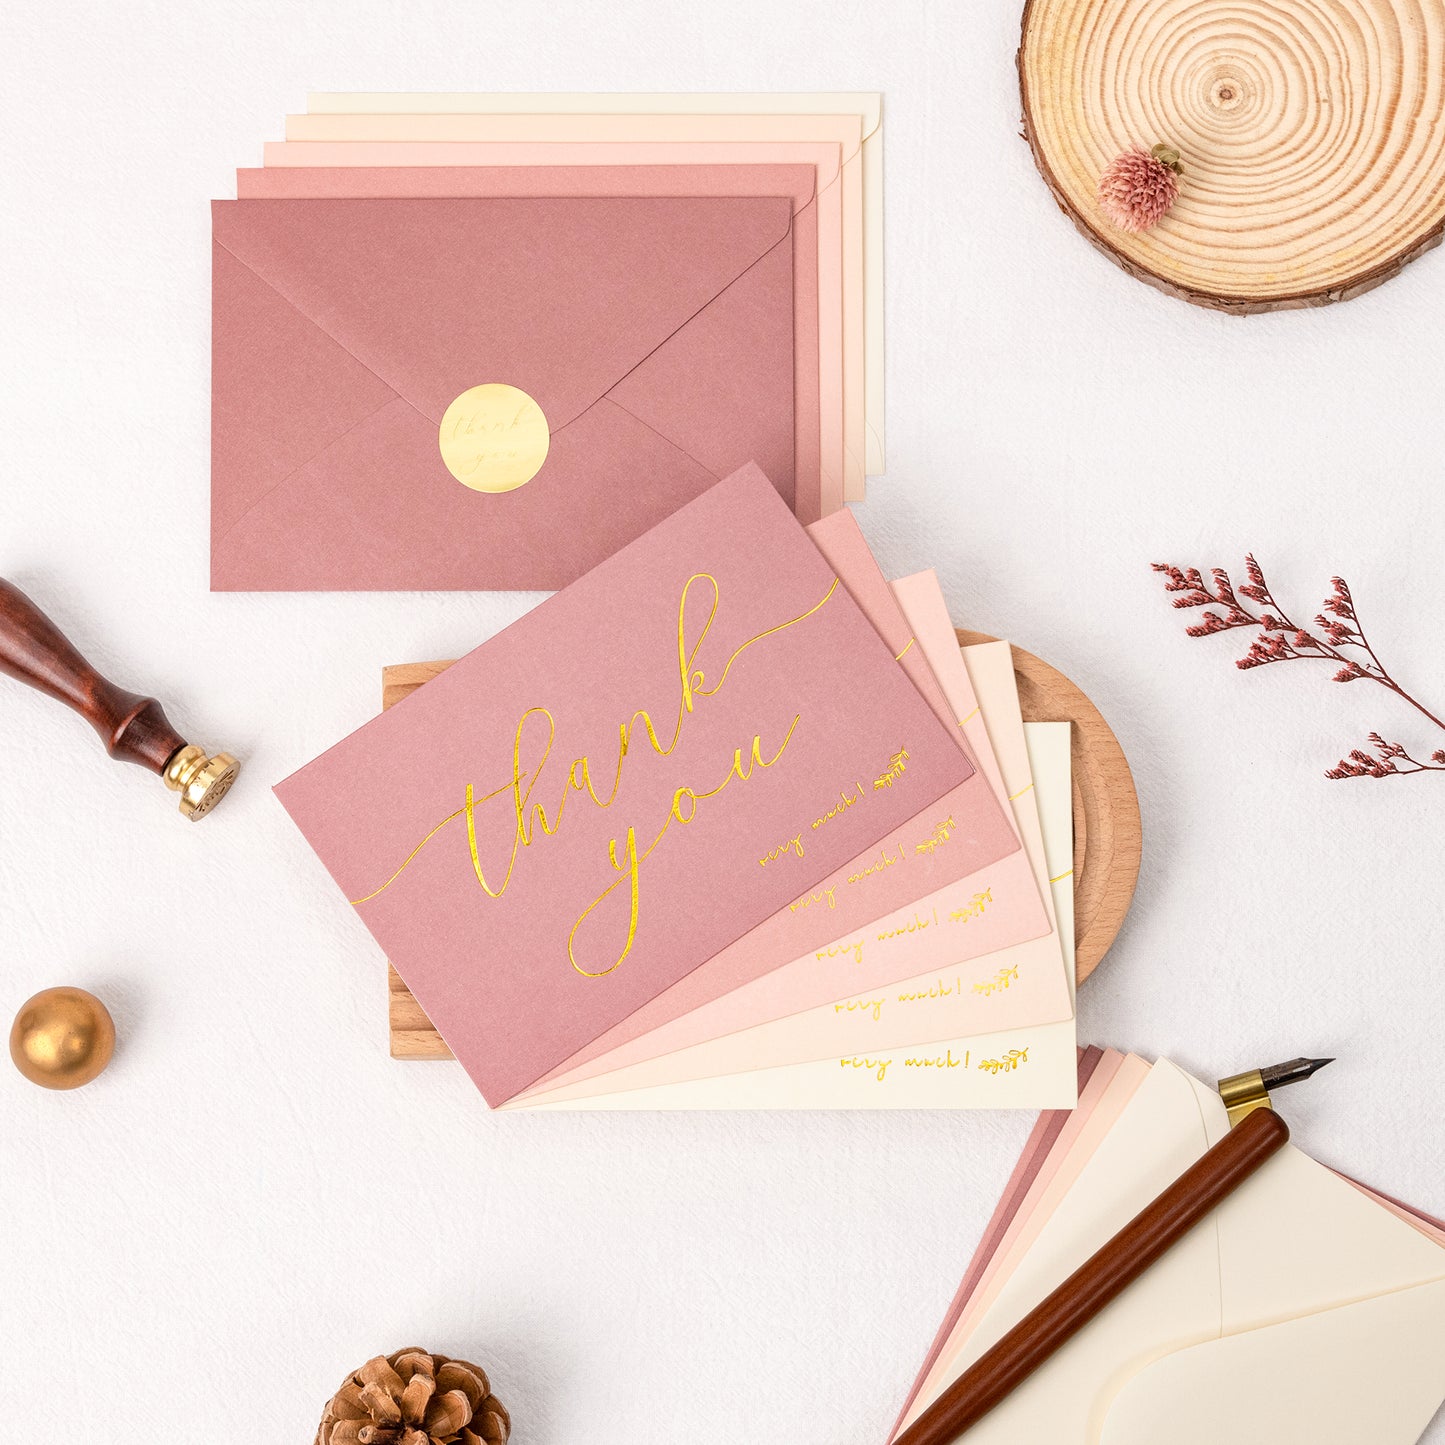 Crisky 50 Pcs Dusty Rose Thank You Cards With 50 Envelopes & 50 Stickers Simple, Chic, Elegant Greeting Cards Perfect for: Wedding/Business/Birthday/Graduation etc. 4 x 6 inches 50 Pack